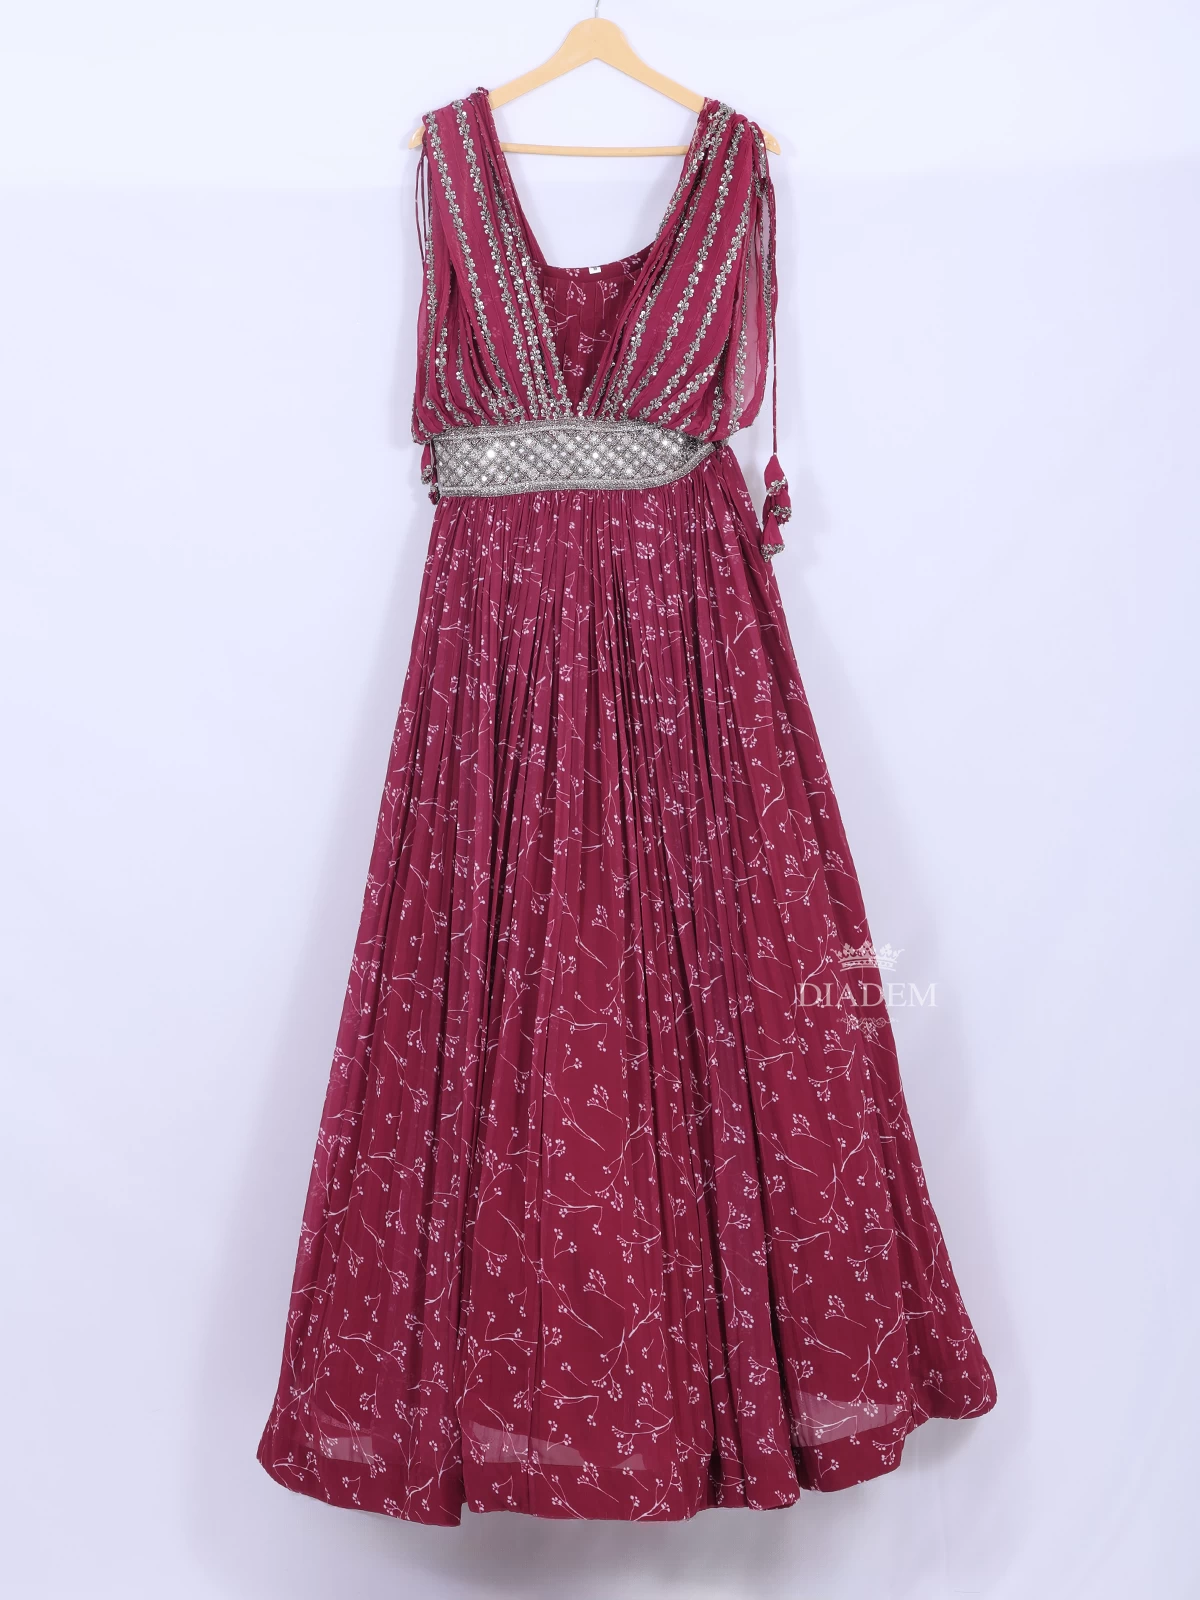 Dark Red Georgette Gown Embellished with Floral Prints and Embroidery